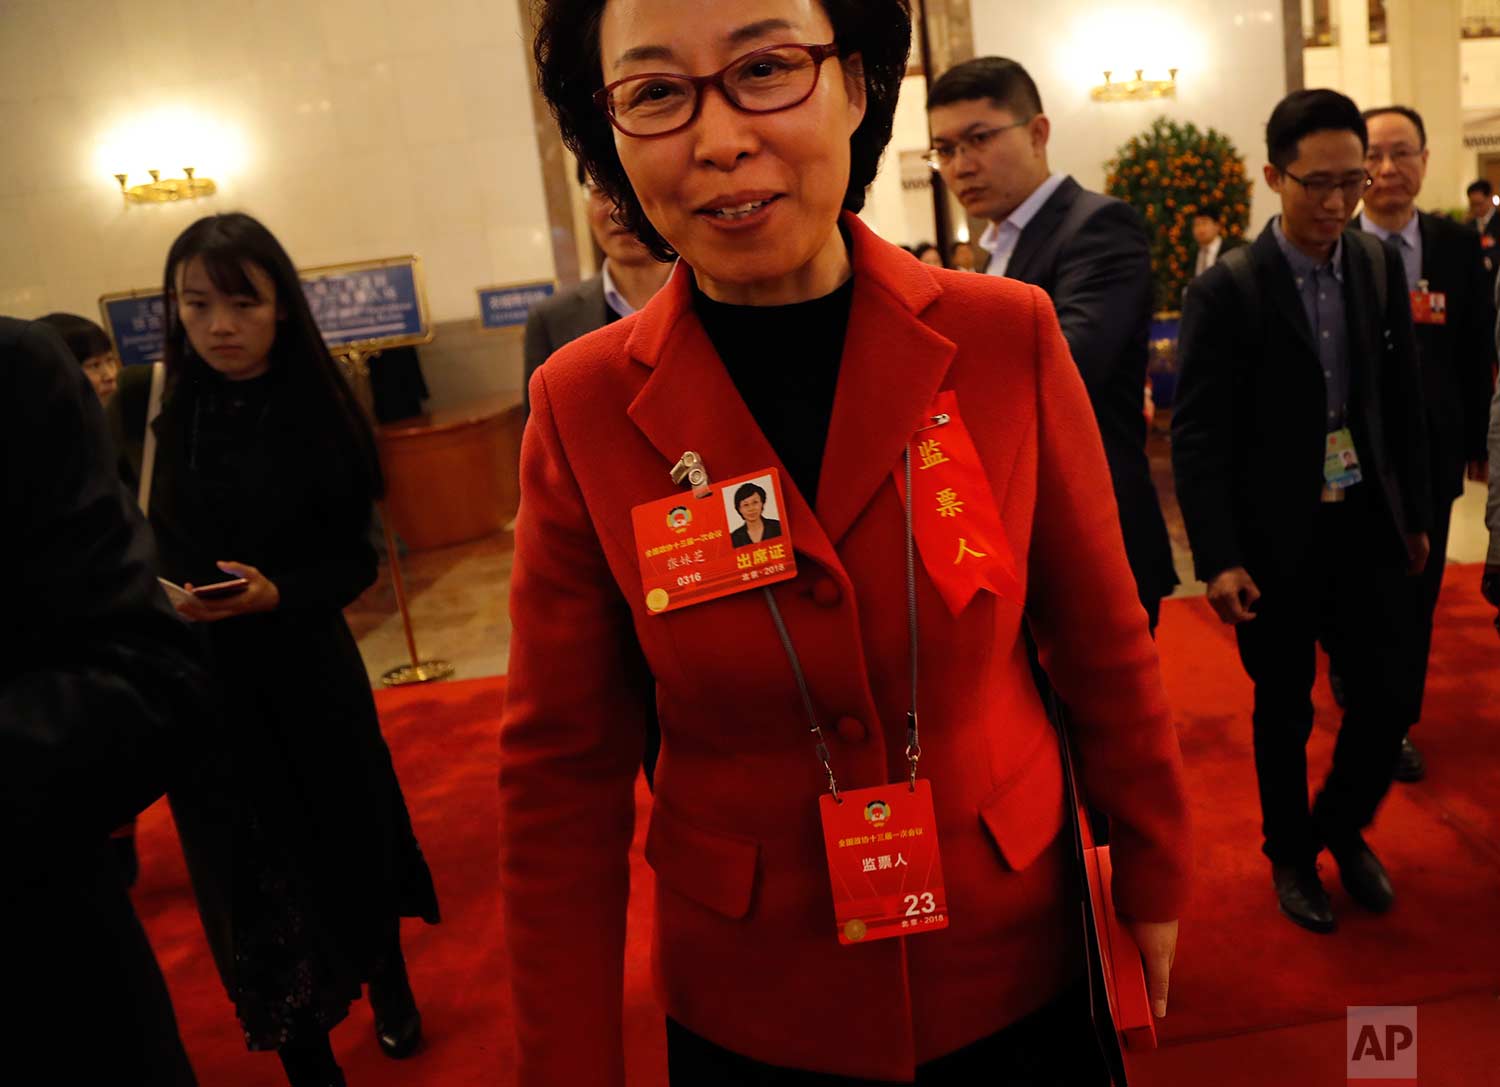  In this Wednesday, March 14, 2018 photo, a delegate in red jacket leaves after attending a plenary session of Chinese People's Political Consultative Conference (CPPCC) at the Great Hall of the People in Beijing. (AP Photo/Aijaz Rahi) 